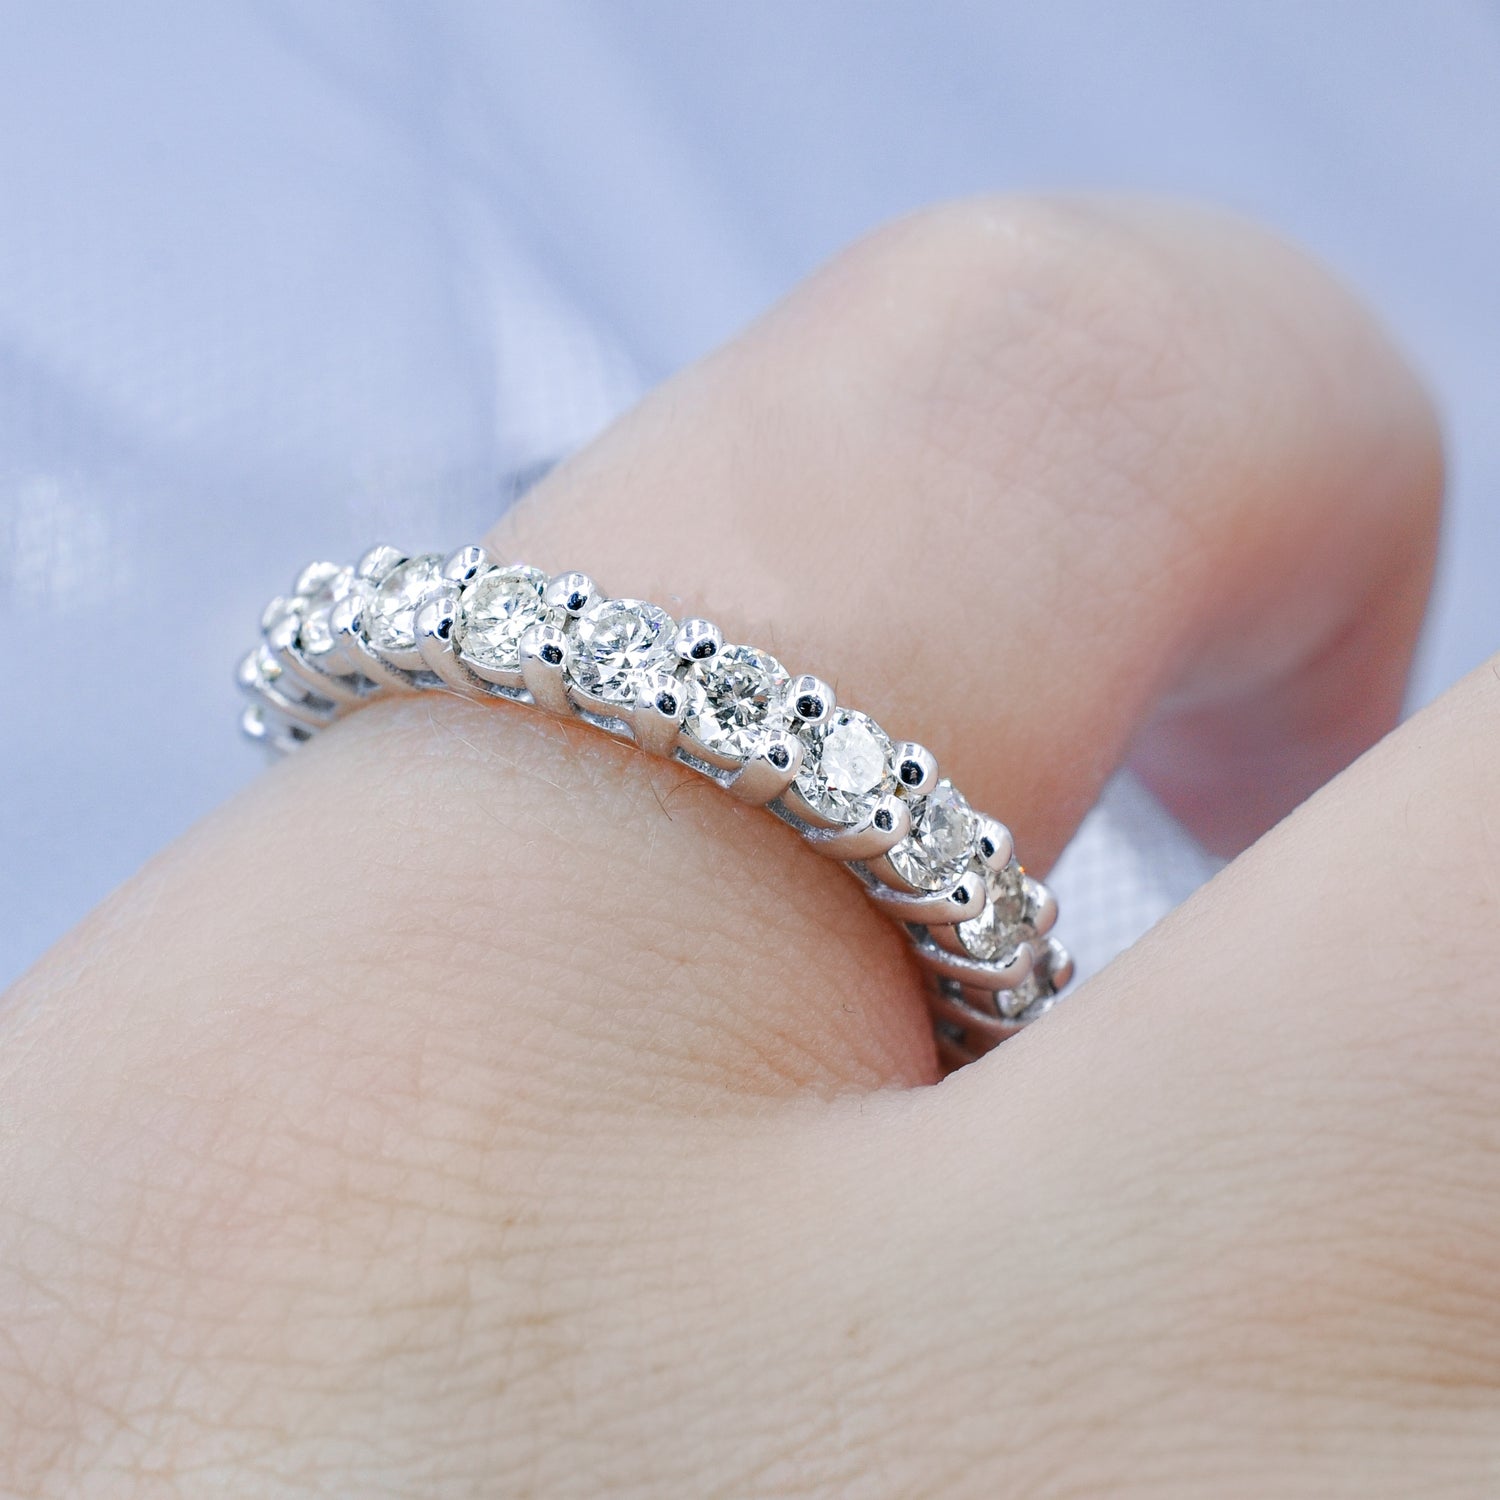 Magnificent 2.50 CT Round Cut Diamond Eternity Ring in 14KT White Gold